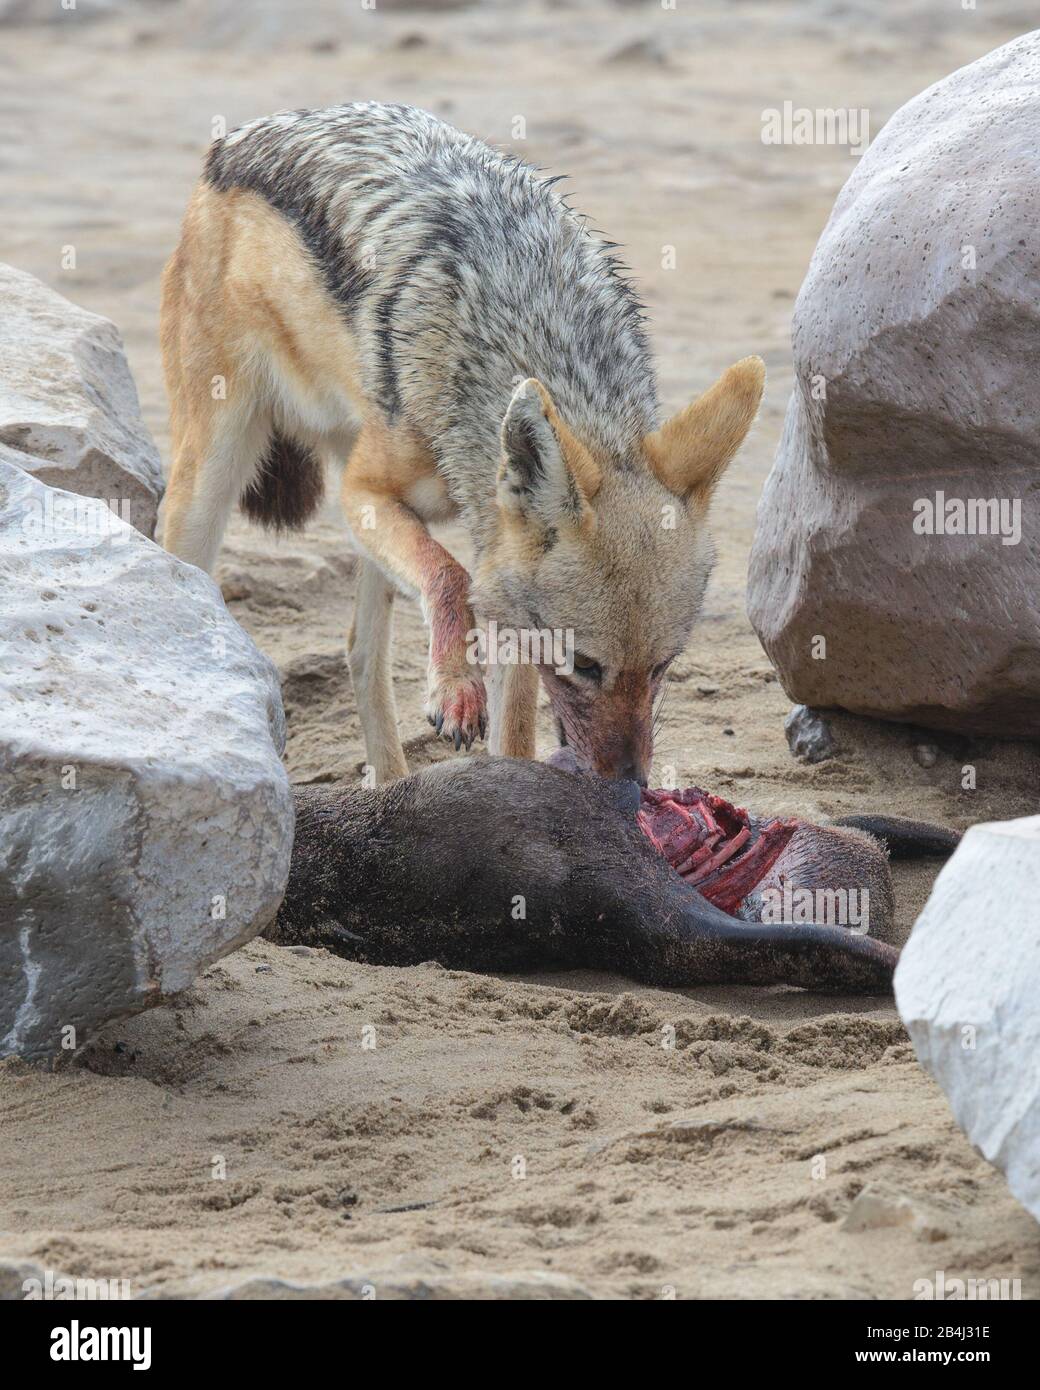 Black backed jackal eating a baby seal on the Skeleton Coast in Africa Stock Photo